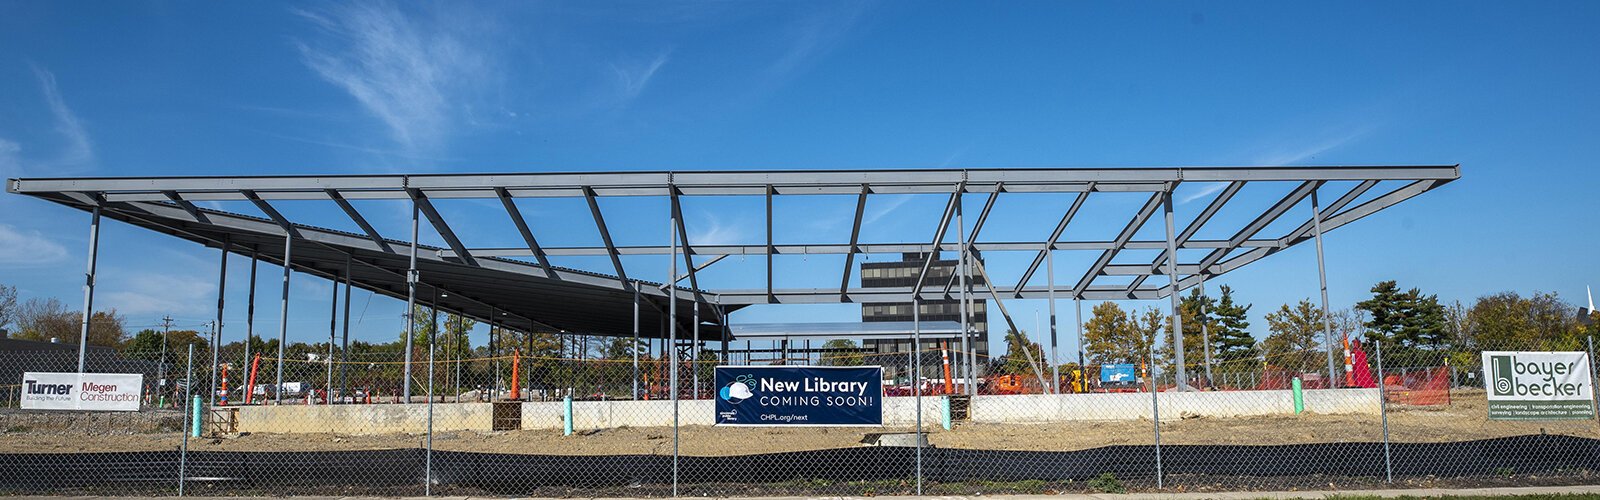 The new library will be the largest branch in the system.